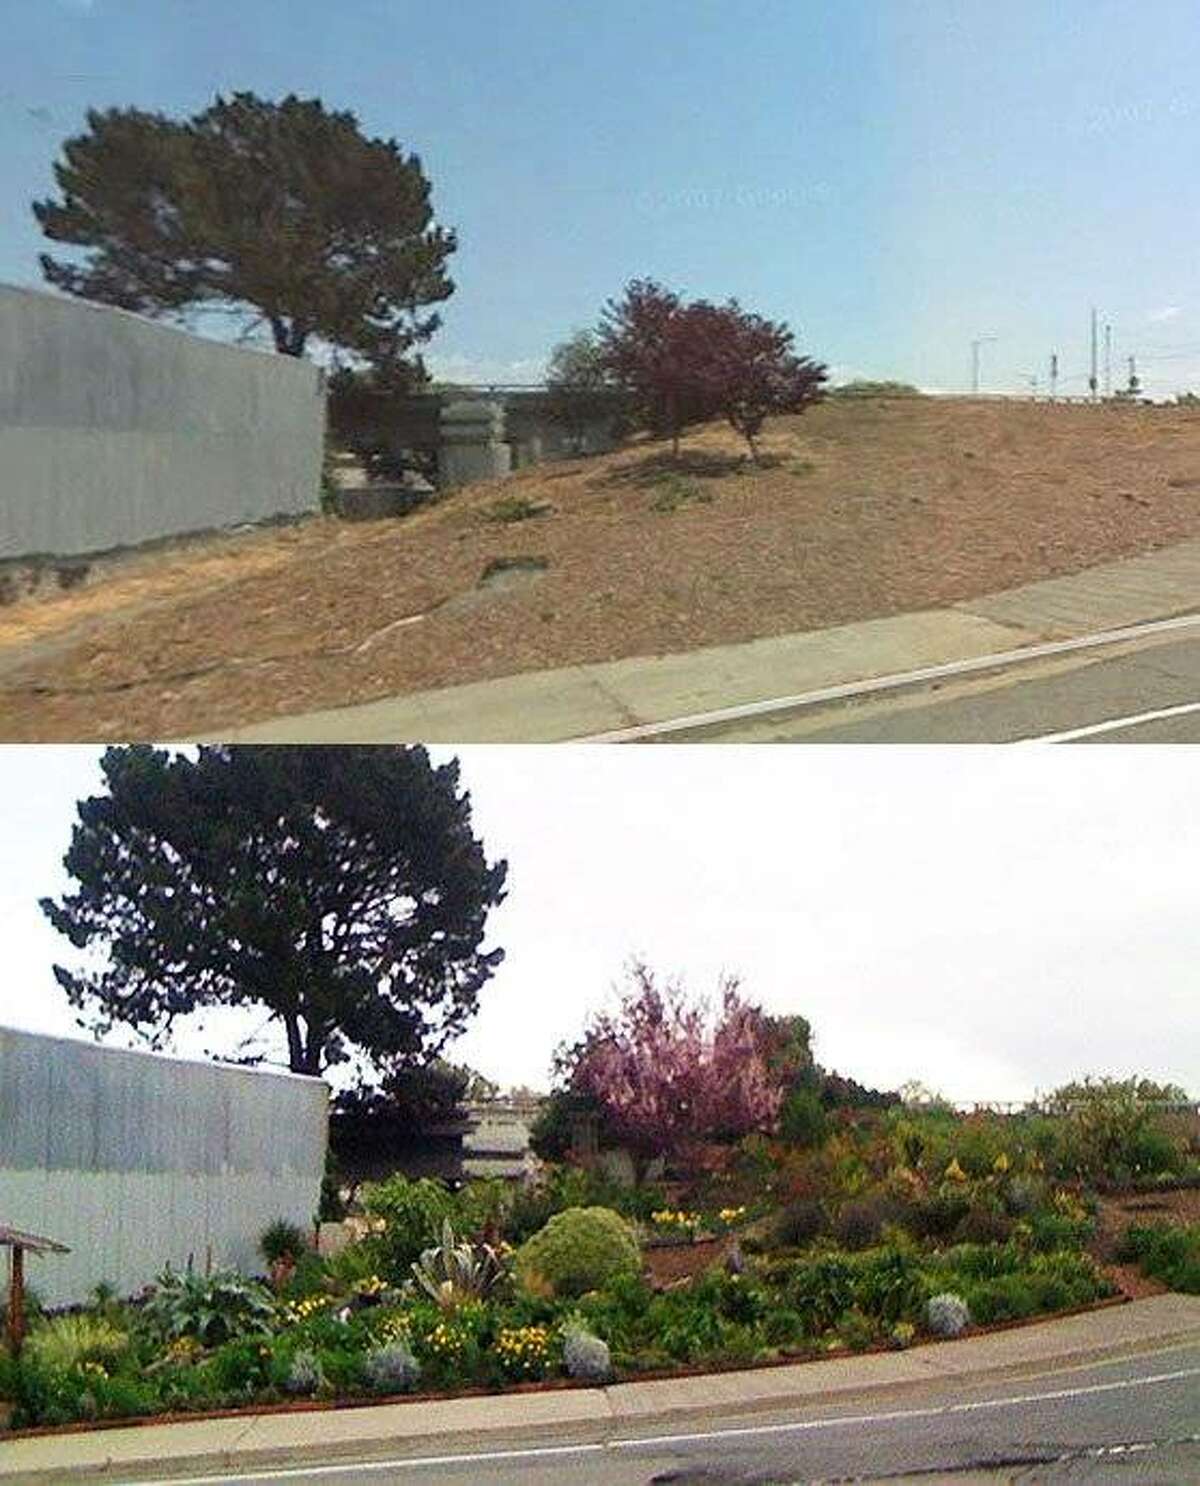 Photos showing the before and after of the work done at the garden near the Mariposa off ramp of the 280 freeway in San Francisco.